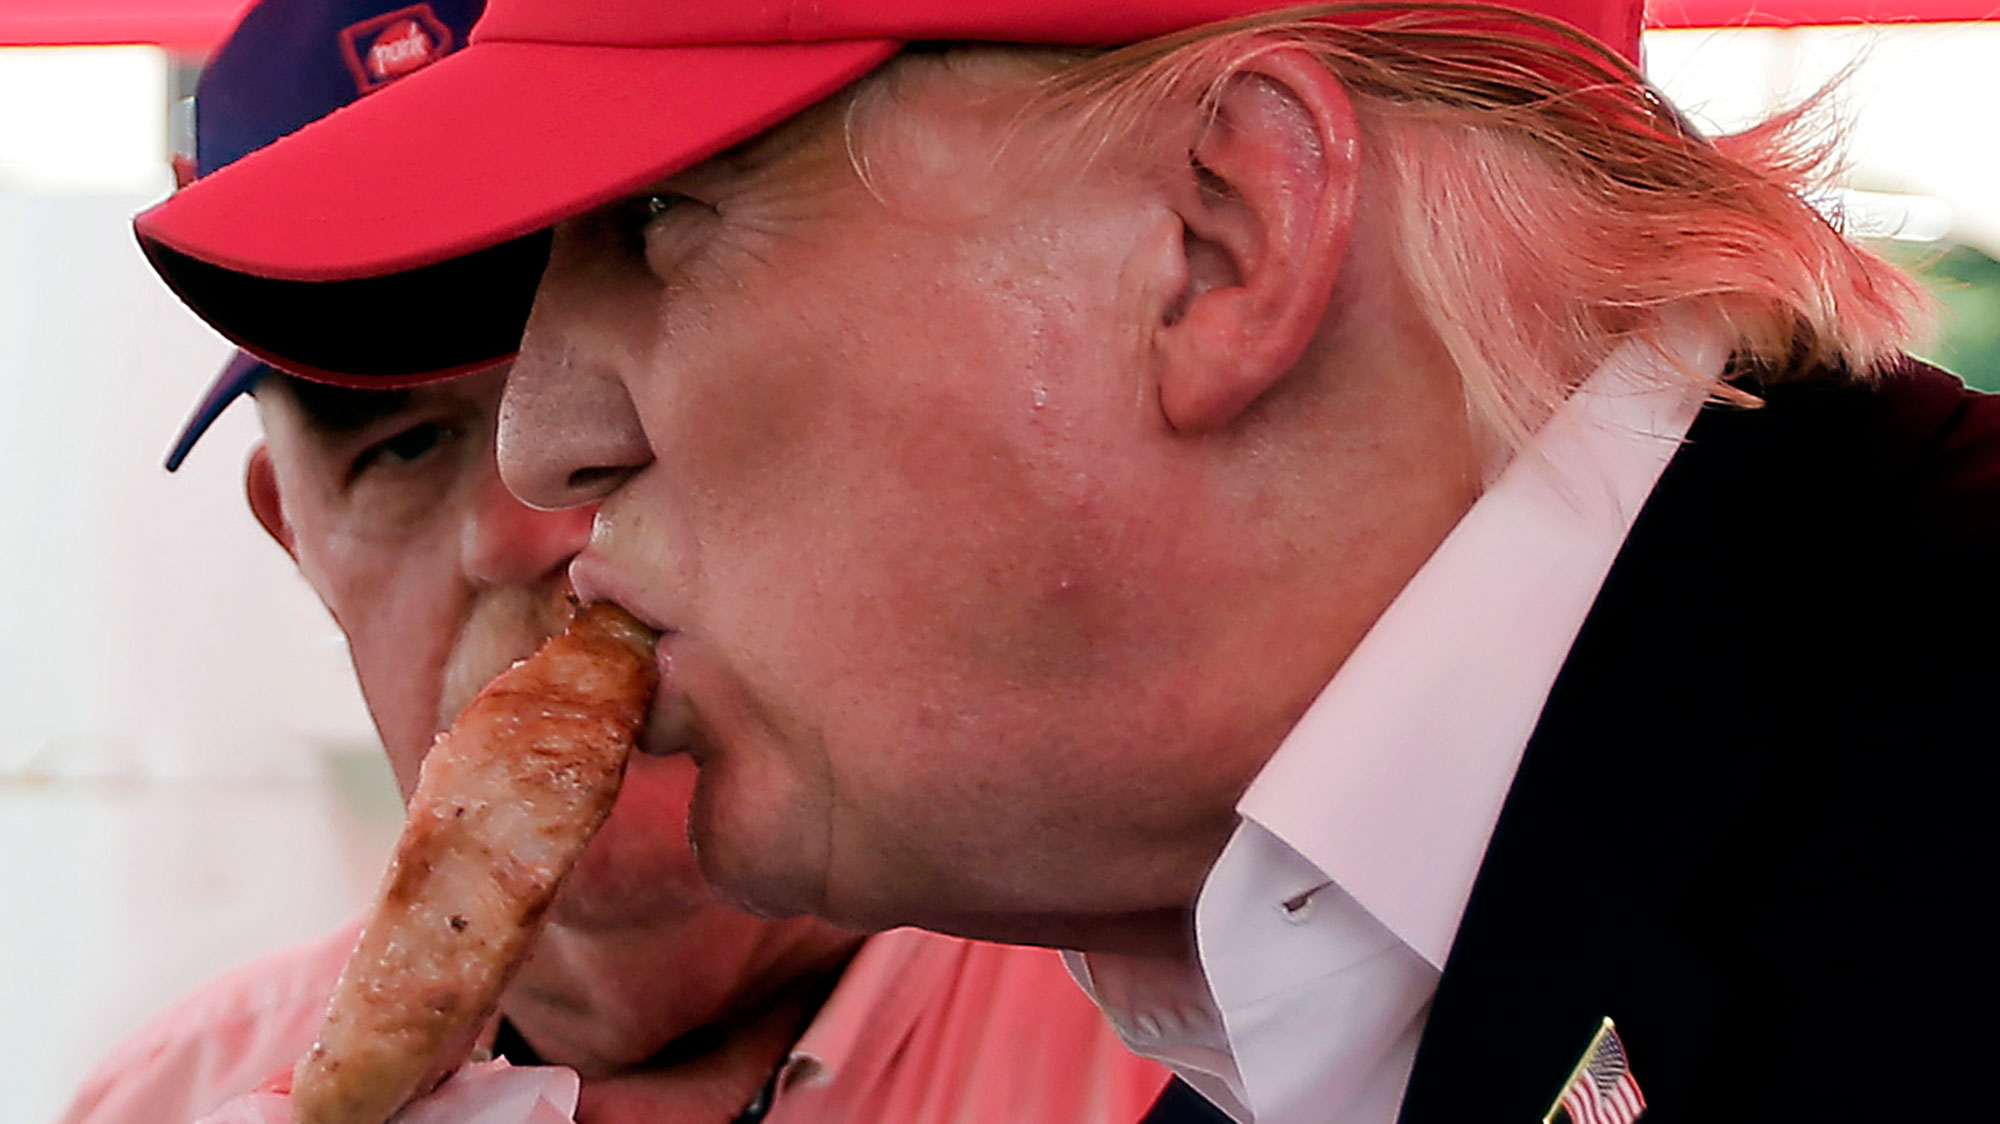 If You Want To Understand Donald Trump Pay Attention To What He Eats